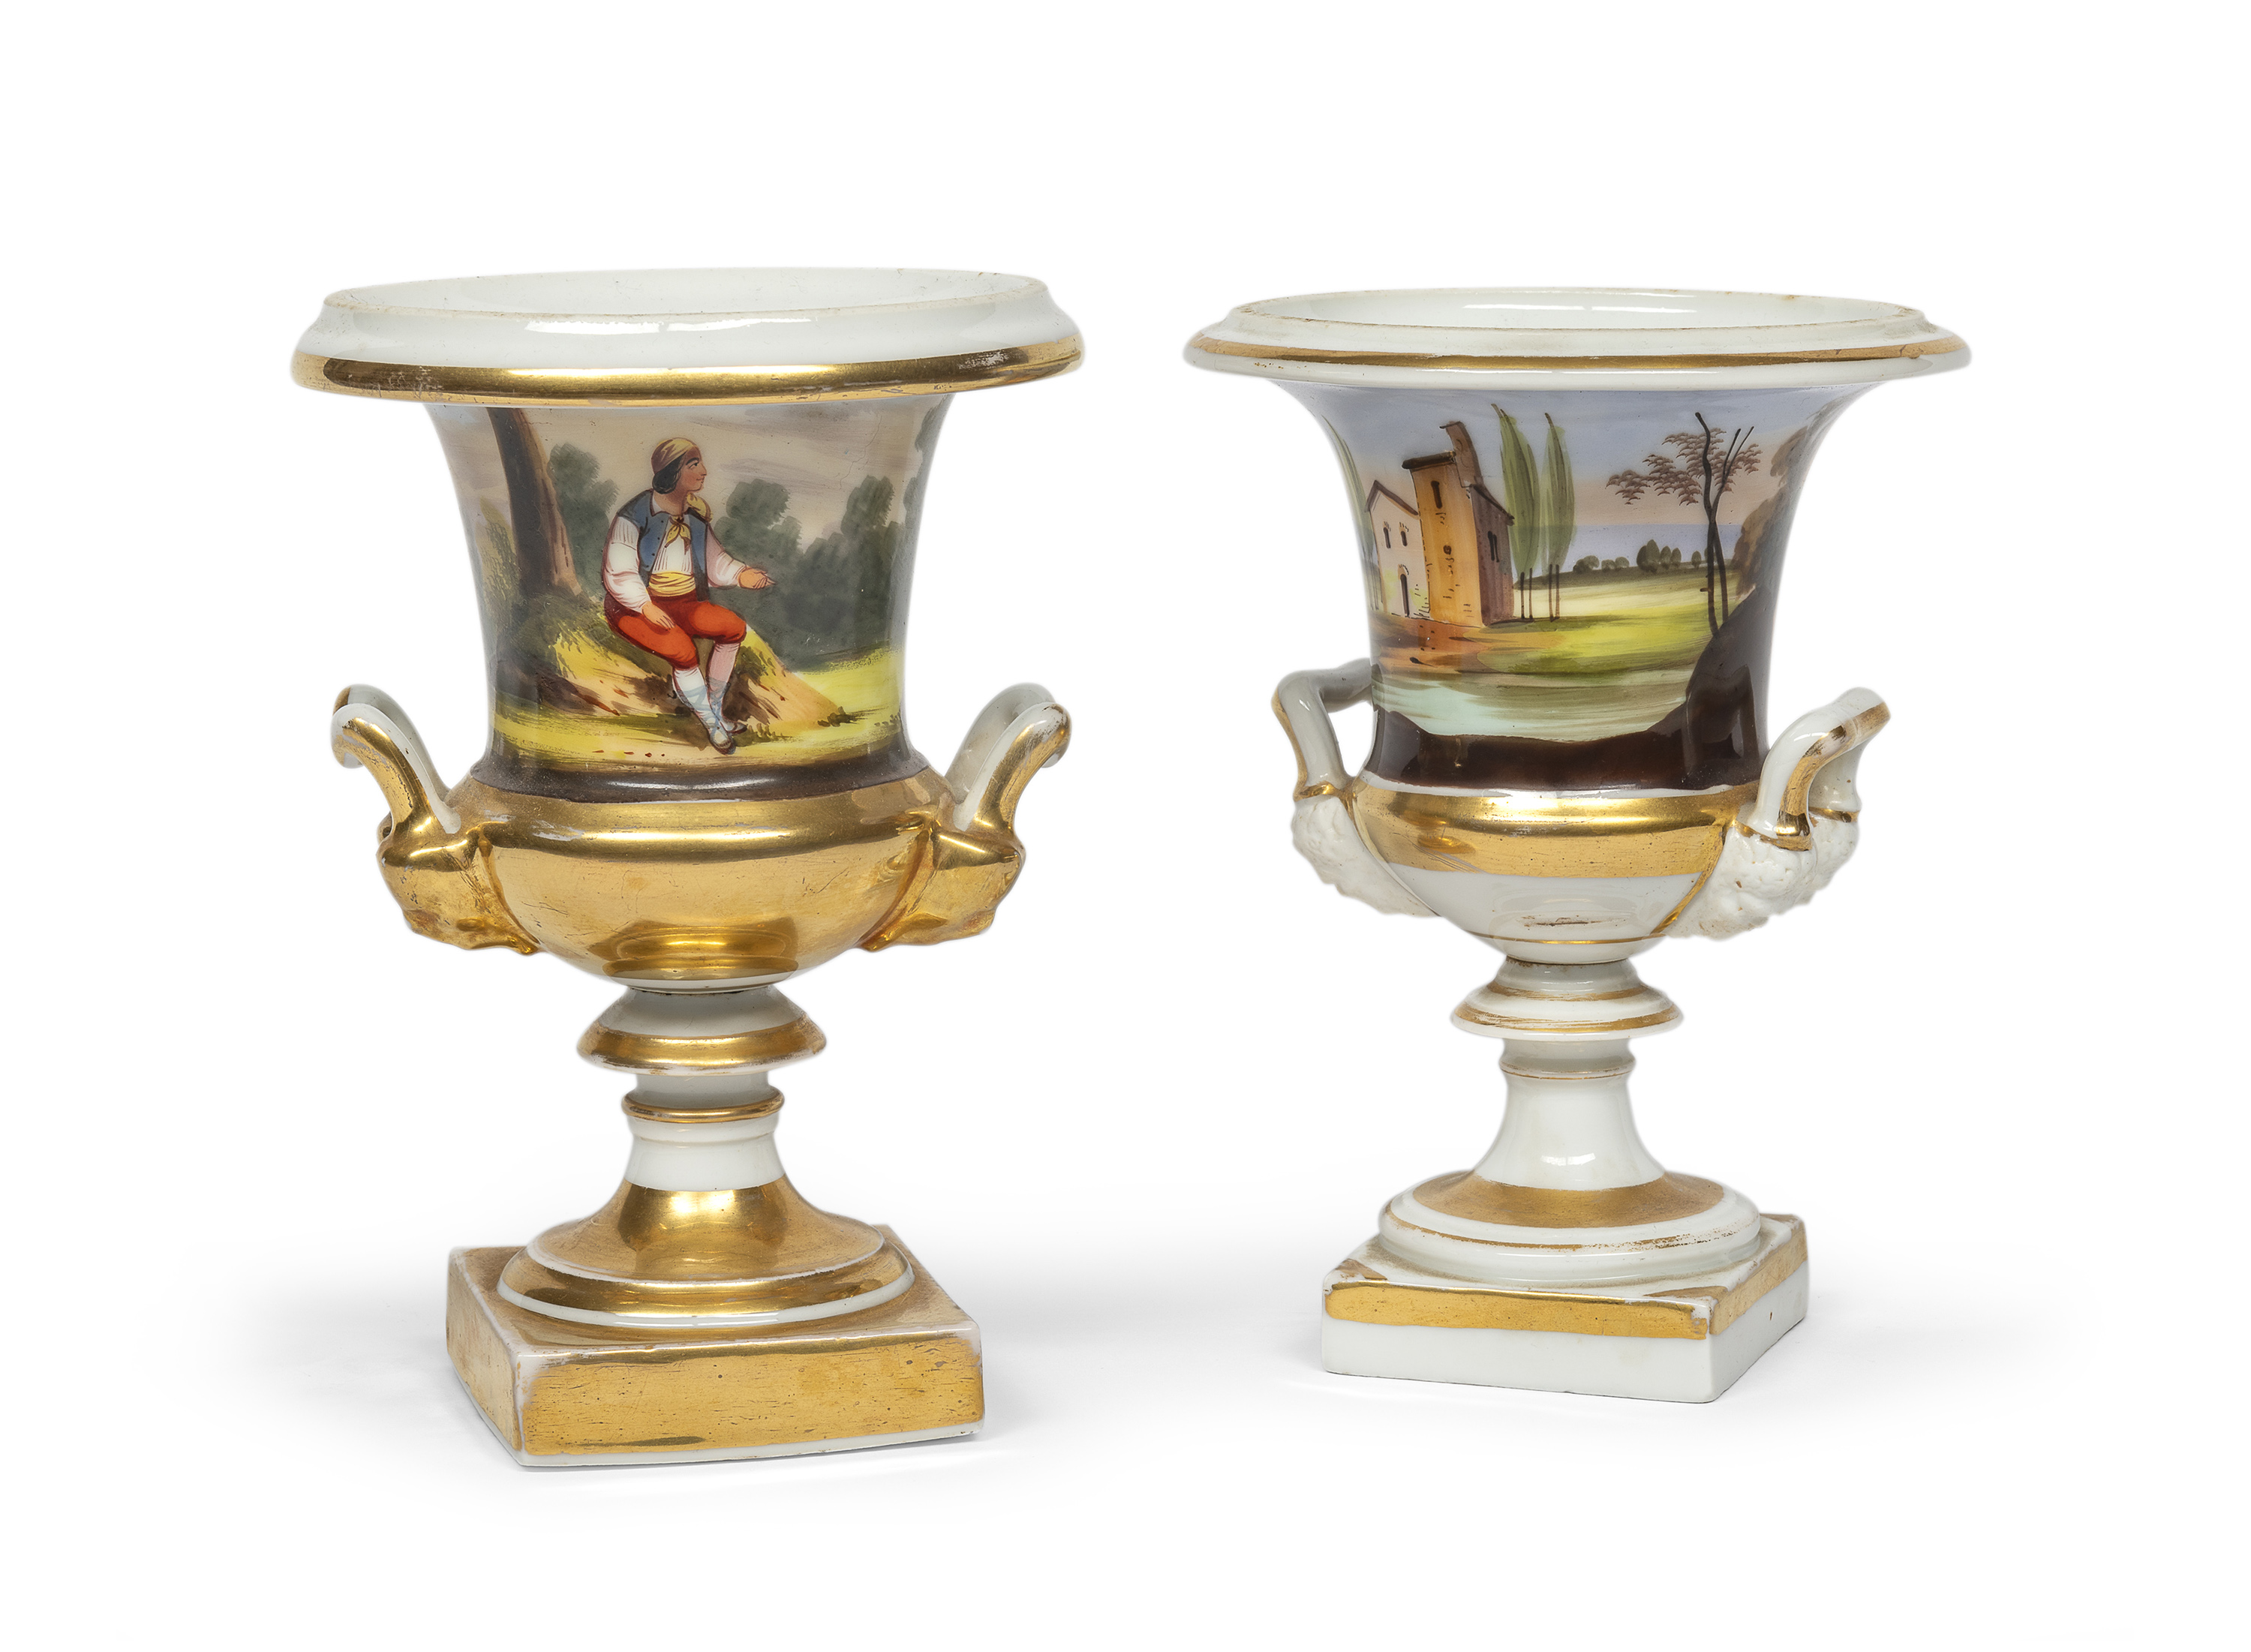 PAIR OF PORCELAIN VASES EARLY 19TH CENTURY